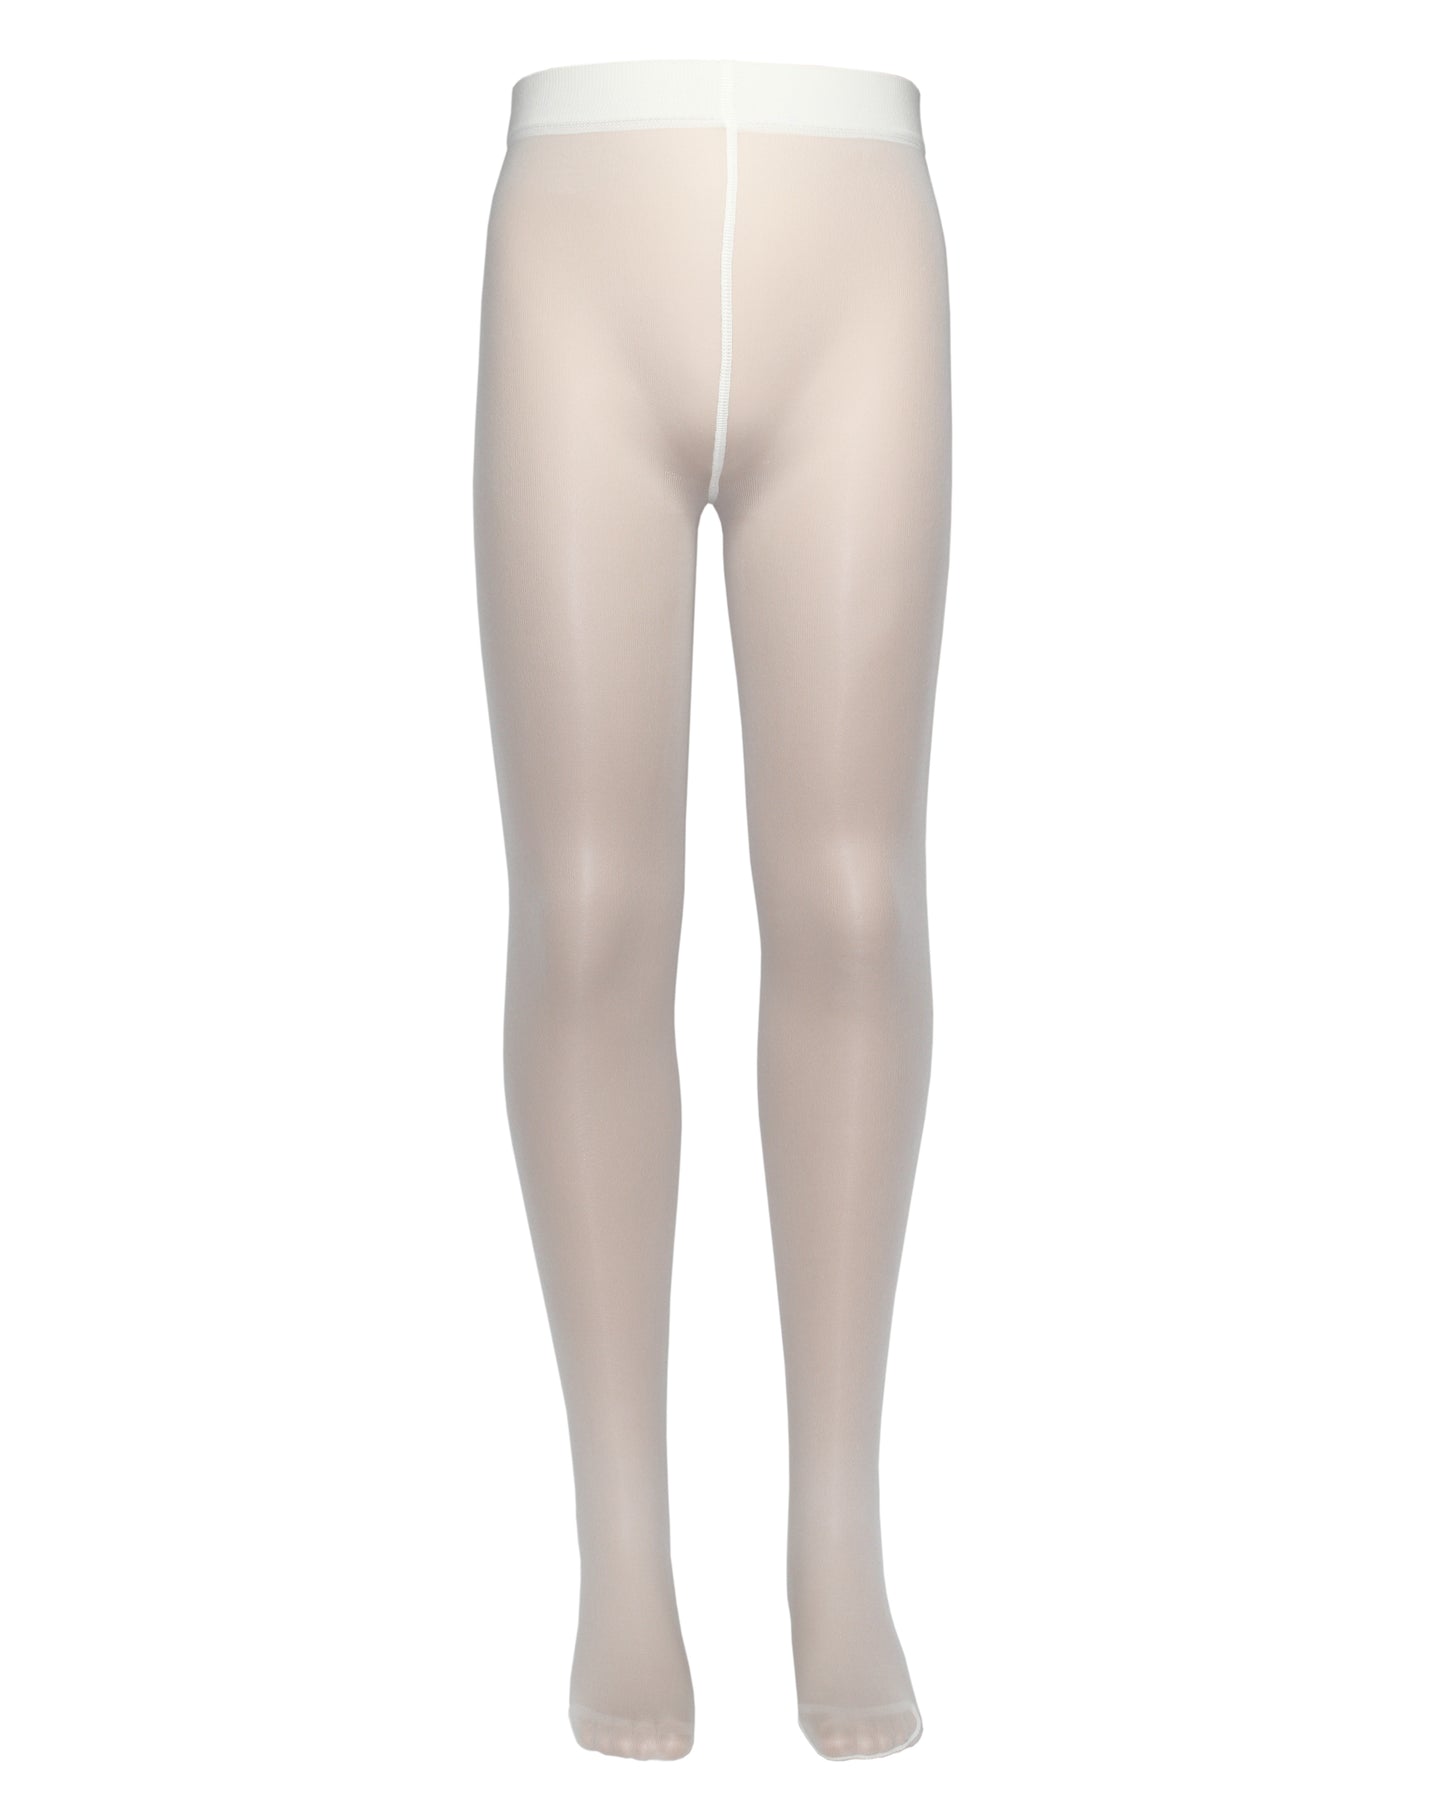 Omsa MiniVelour 40 Tights - White soft and matte opaque plain kid's tights perfect for holy communions and wedding flower girls.